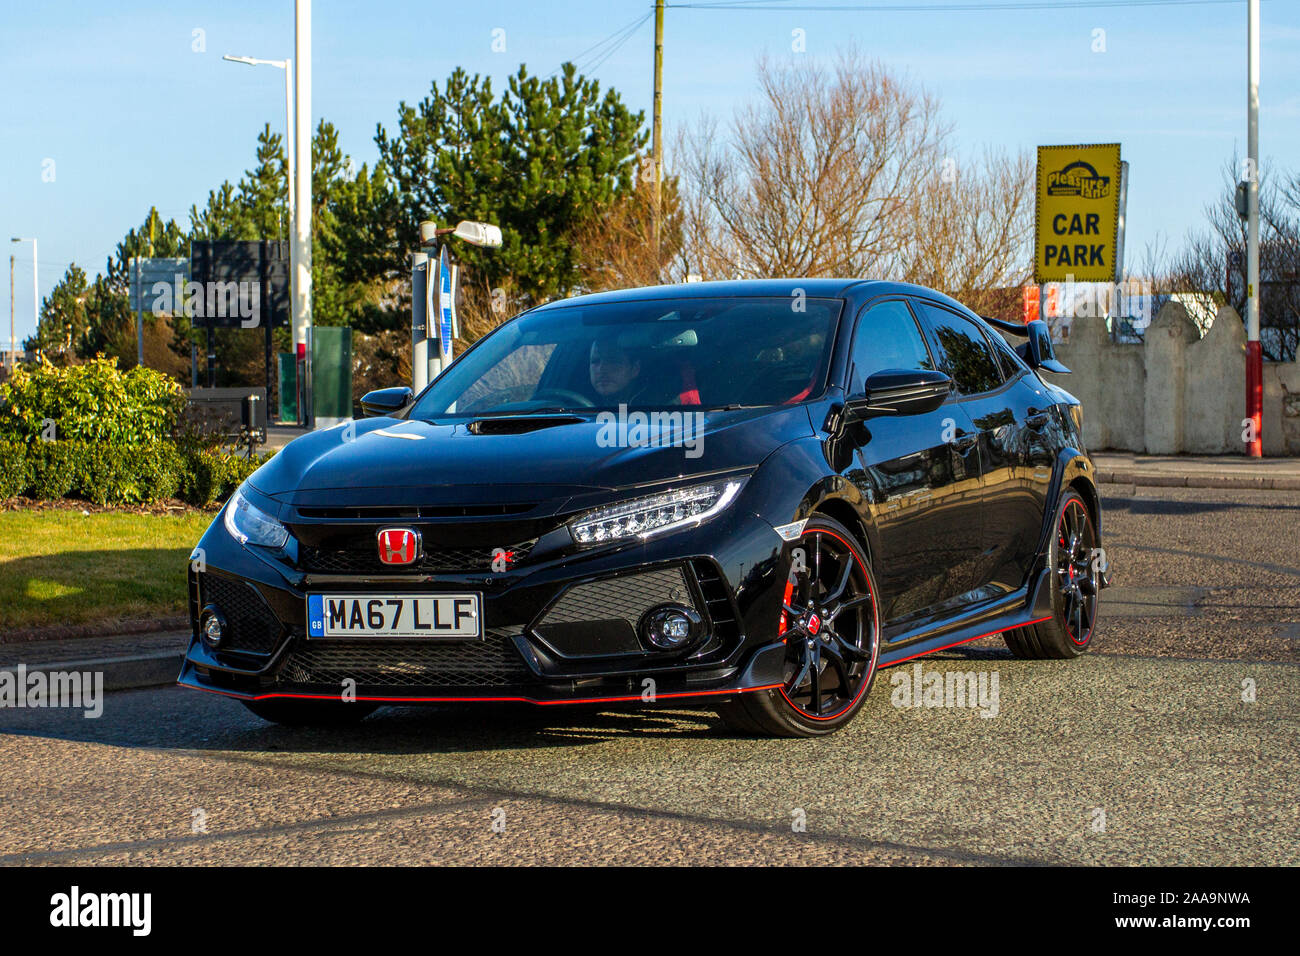 2017 black Honda Civic GT Type R Vtec; Car at Southport, Merseyside. North-West Supercar show event as of cars, sports, coupés, roadsters, supercars, hypercars, race cars, exotic car owners and super SUVs, arrive in the coastal resort on a warm spring day. Cars are bumper to bumper on the seafront esplanade as supercar owners enjoy a motoring meet. Stock Photo